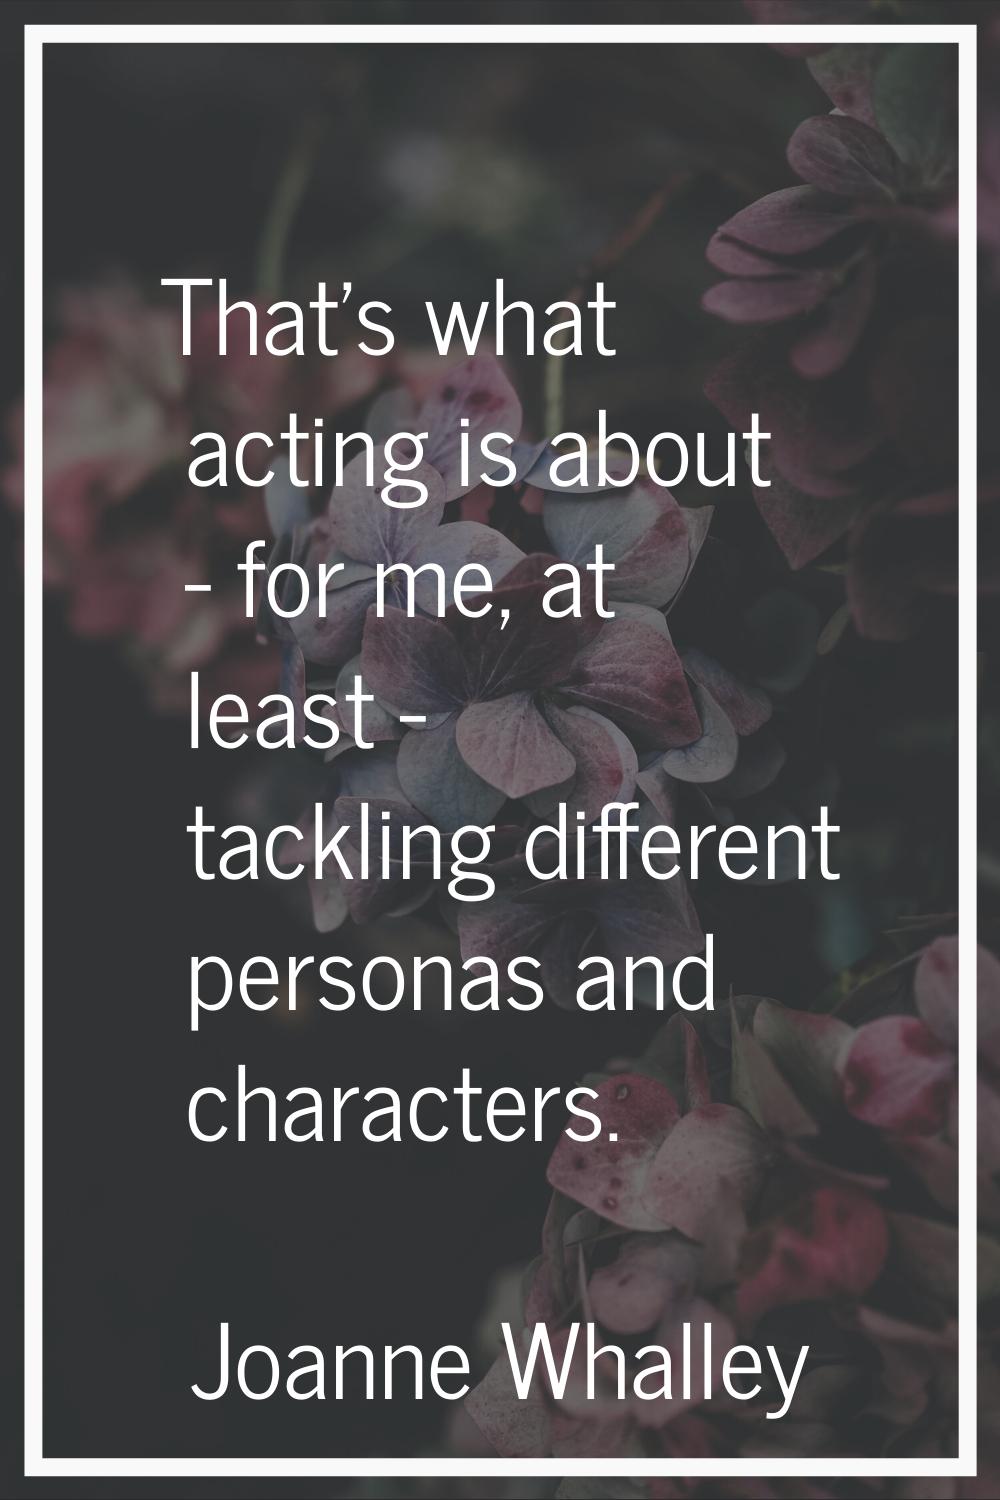 That's what acting is about - for me, at least - tackling different personas and characters.